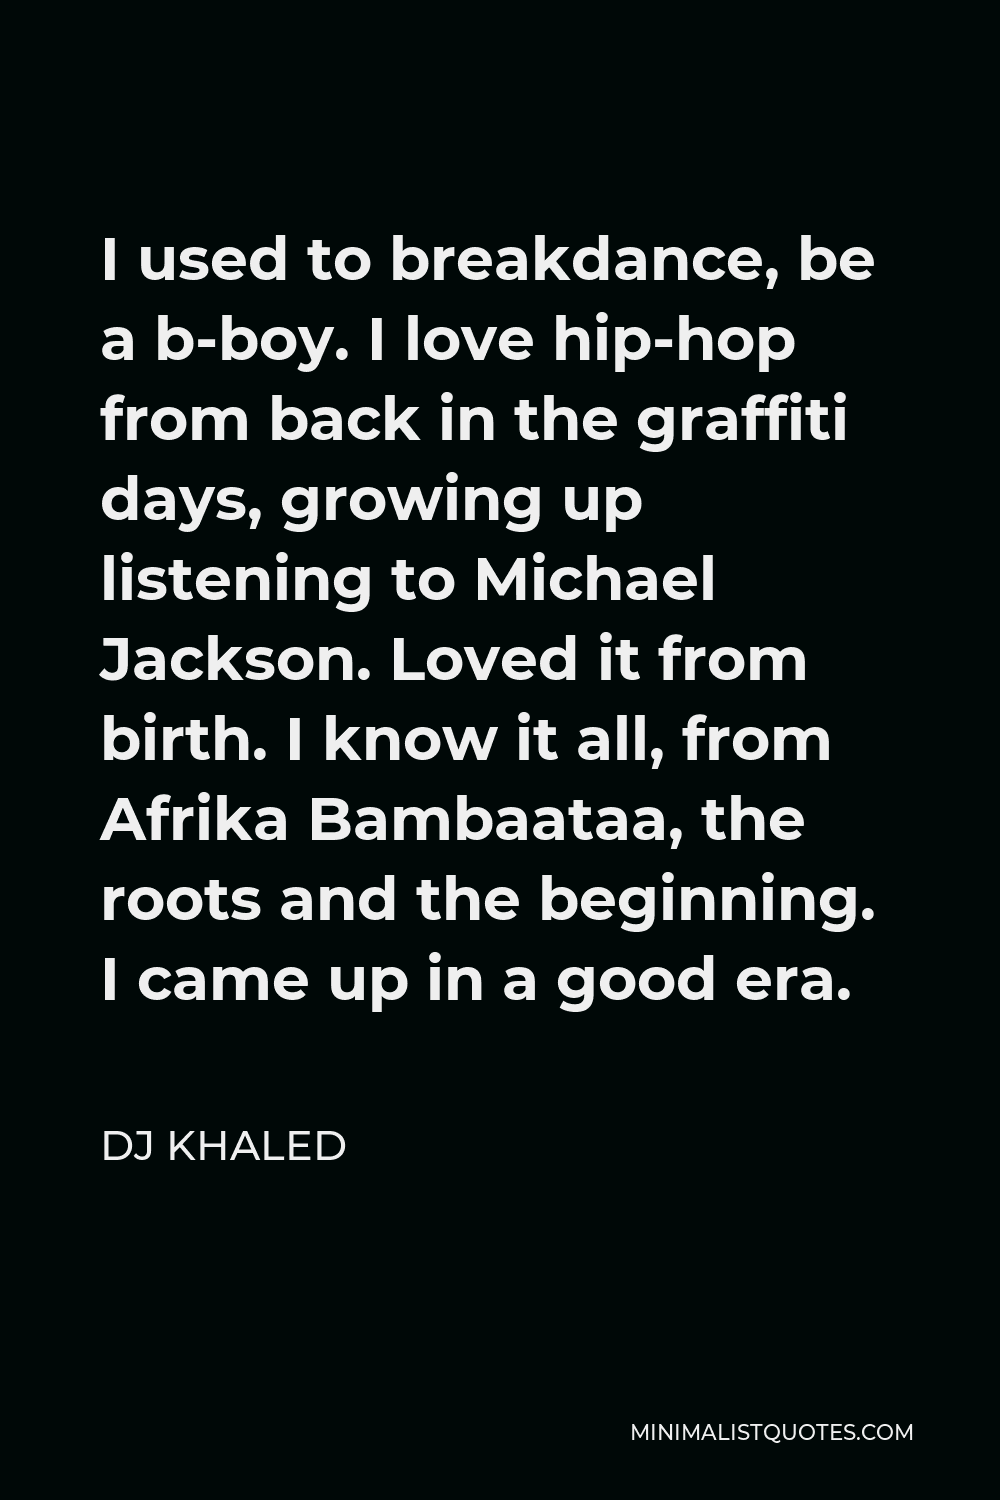 DJ Khaled Quote - I used to breakdance, be a b-boy. I love hip-hop from back in the graffiti days, growing up listening to Michael Jackson. Loved it from birth. I know it all, from Afrika Bambaataa, the roots and the beginning. I came up in a good era.